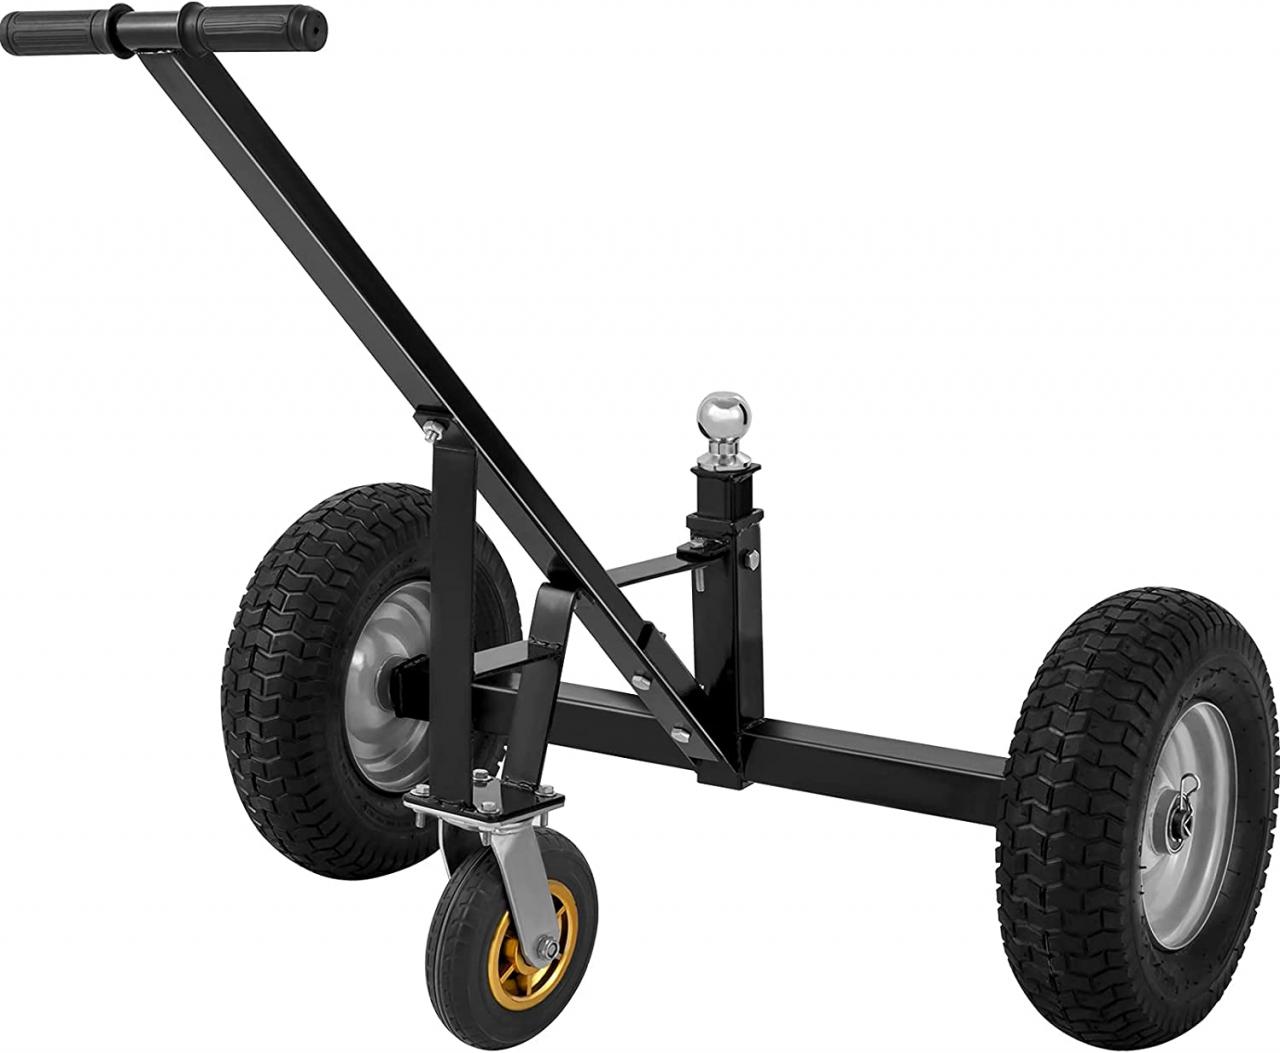 Buy VEVOR Adjustable Trailer Dolly, 800 Lbs Capacity Trailer Mover Dolly,  15.7 -23.6 Adjustable Height, 2 Ball Trailer Mover with 16 Wheels, Heavy-Duty  Tow Dolly for Car, RV, Boat Online in Taiwan. B099J52QDT